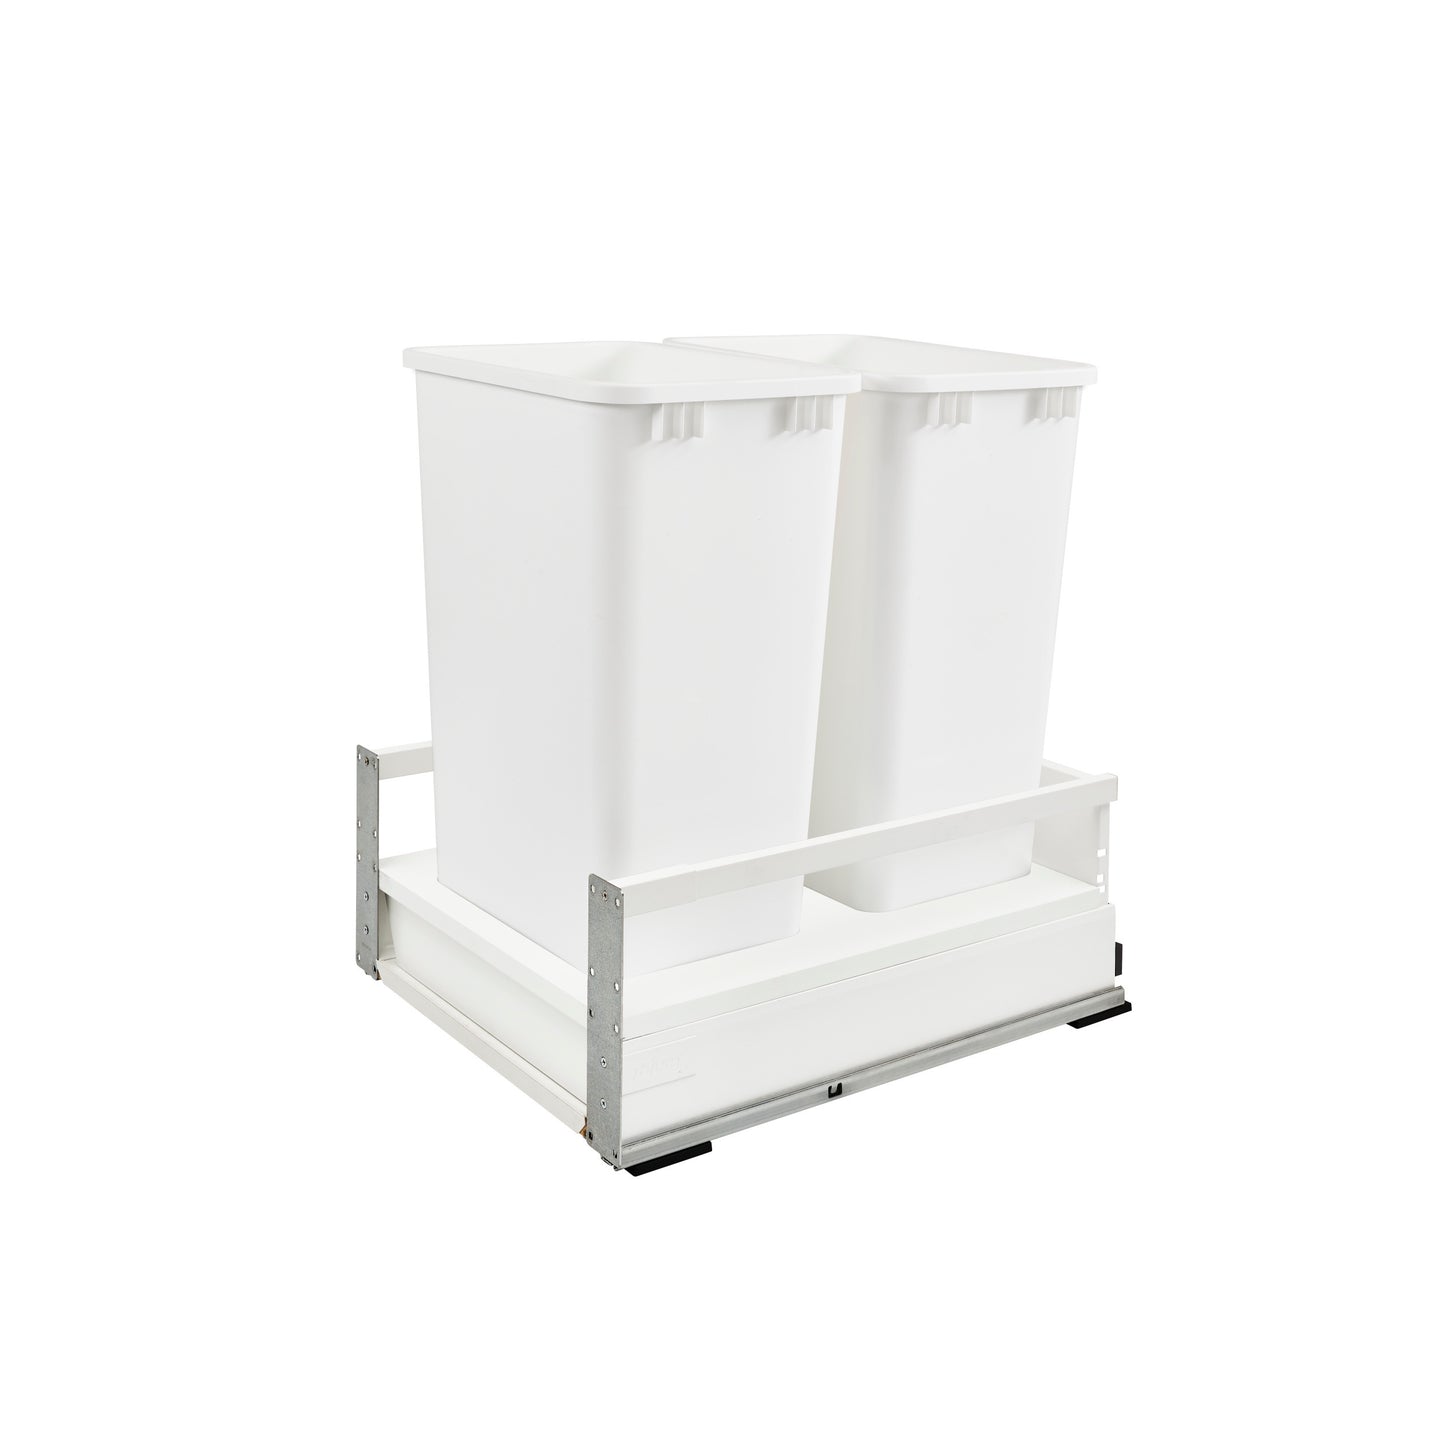 Rev-A-Shelf / TWCSD-21DM-2 / Tandem Pullout Waste/Trash Container w/ Soft-Close and SERVO-DRIVE System